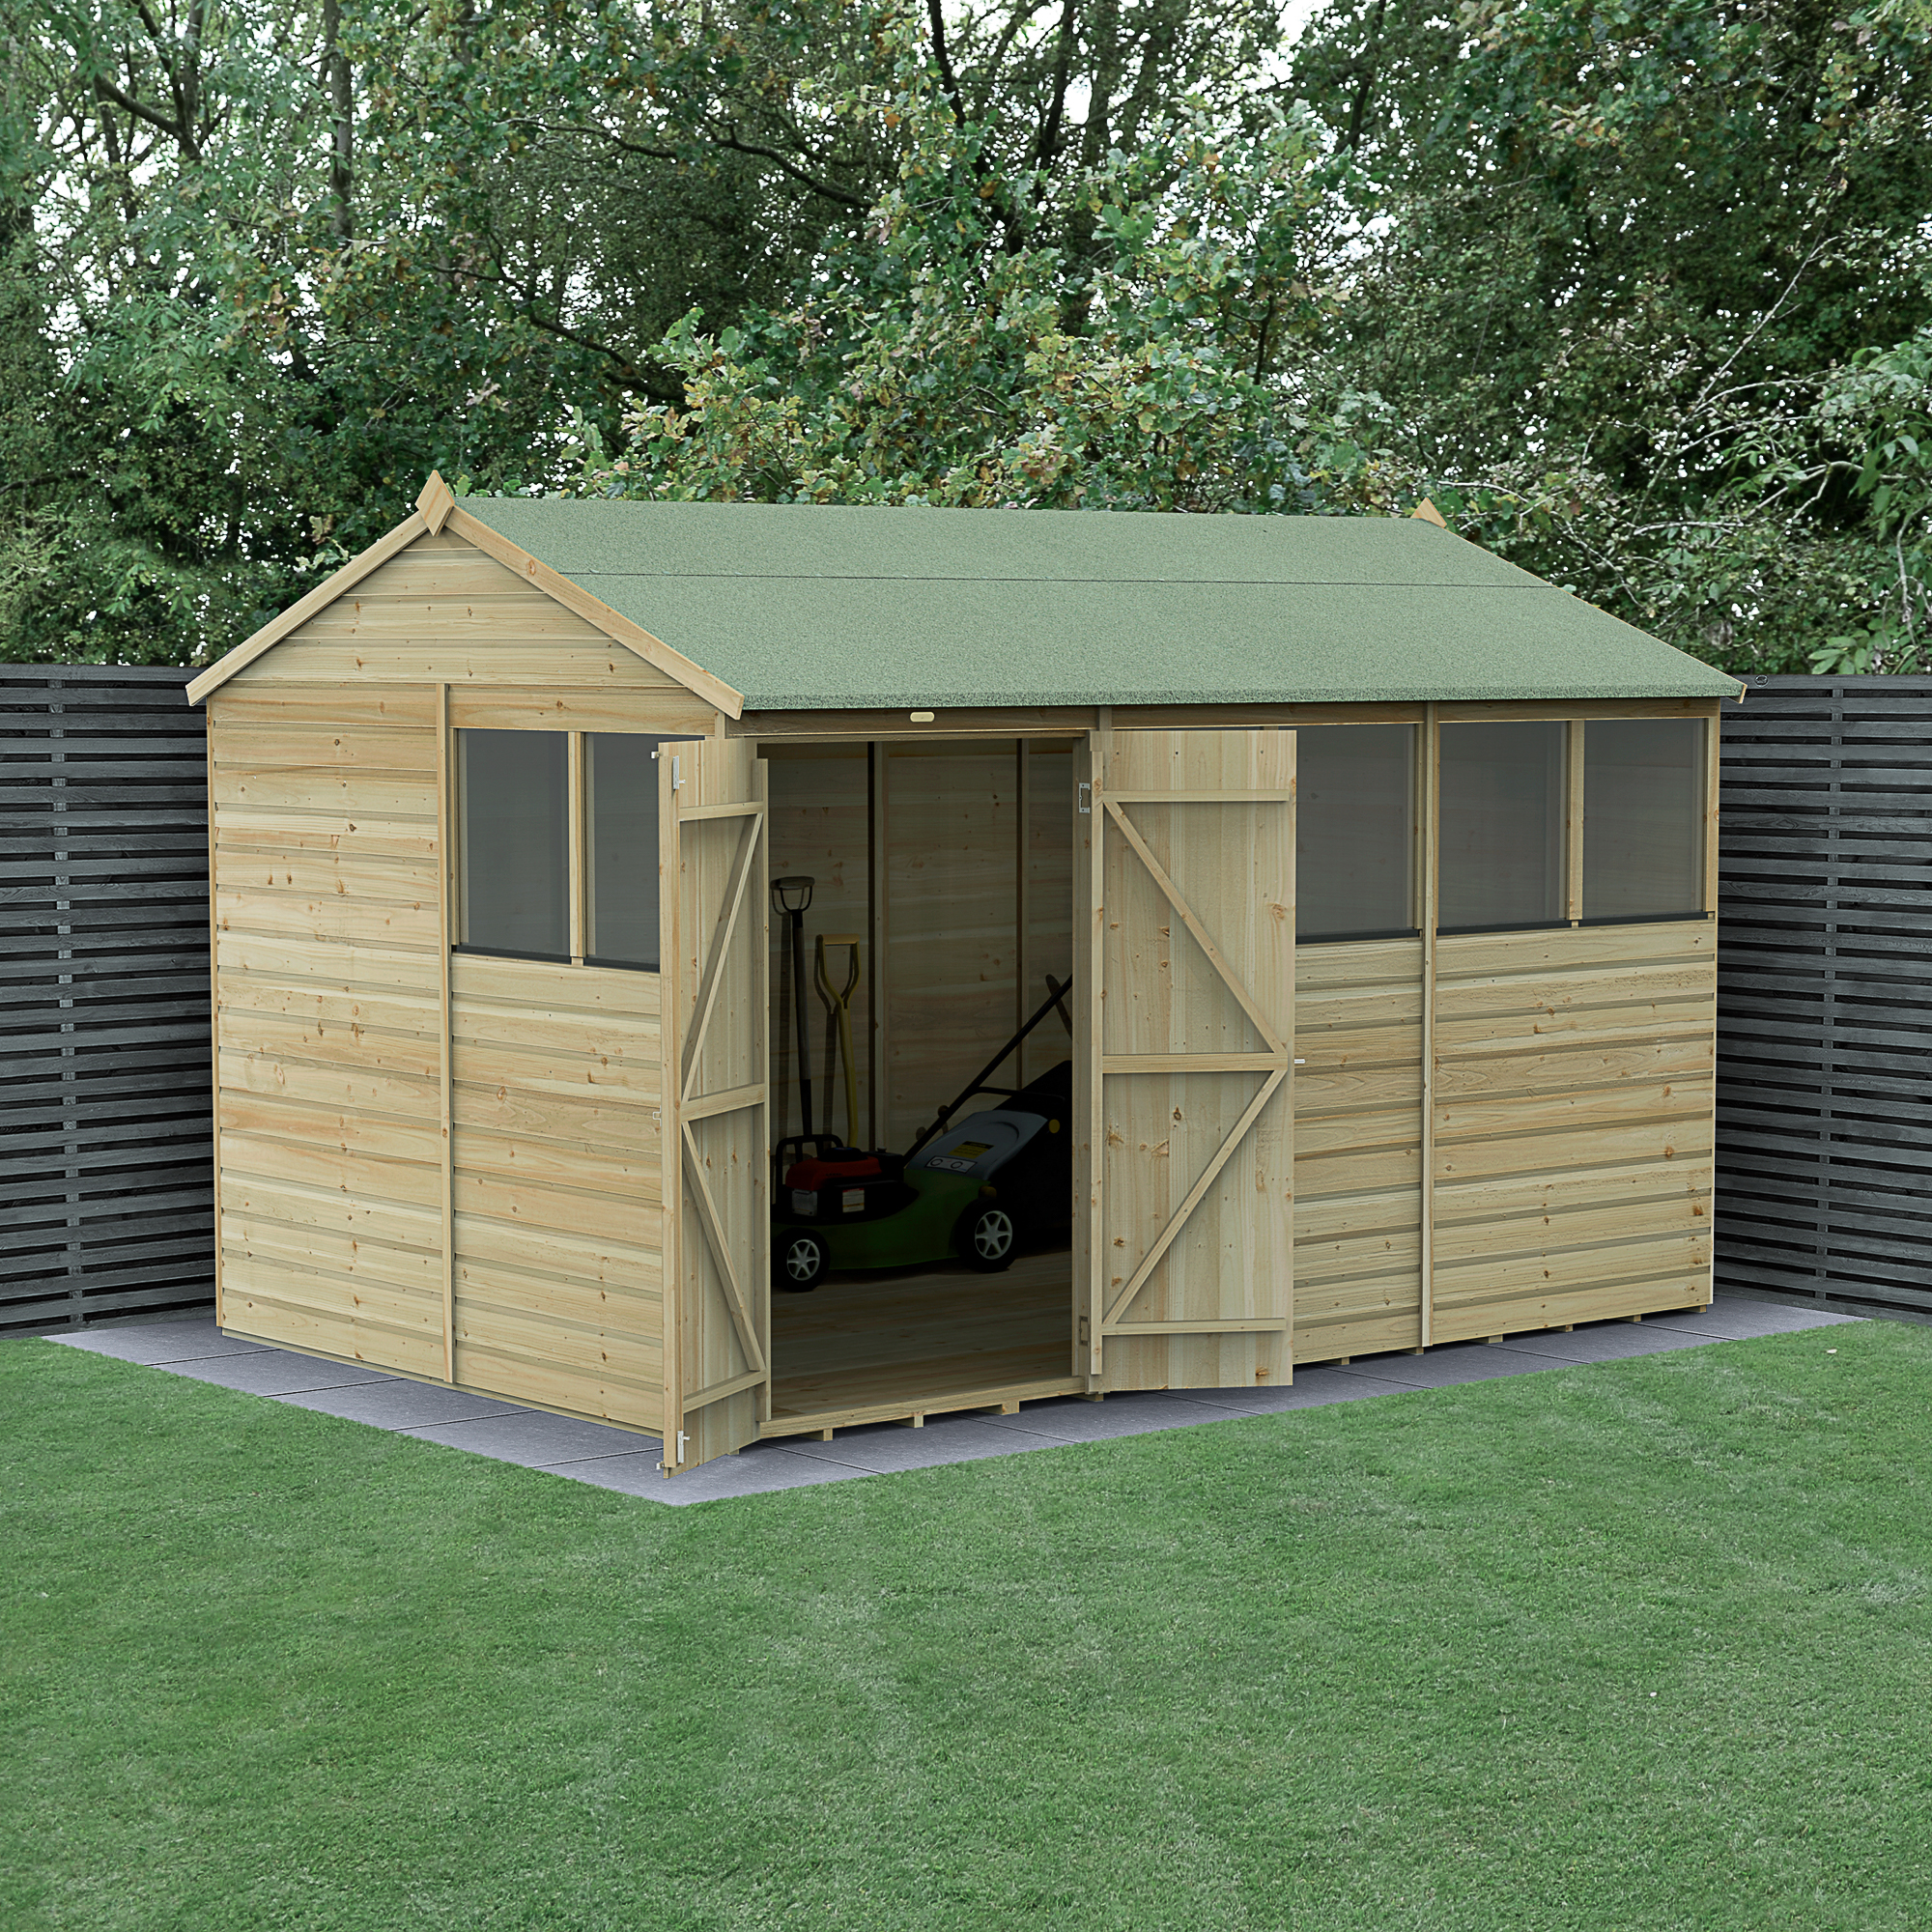 Forest Garden Beckwood 12 x 8ft Reverse Apex Shiplap Pressure Treated Double Door Shed